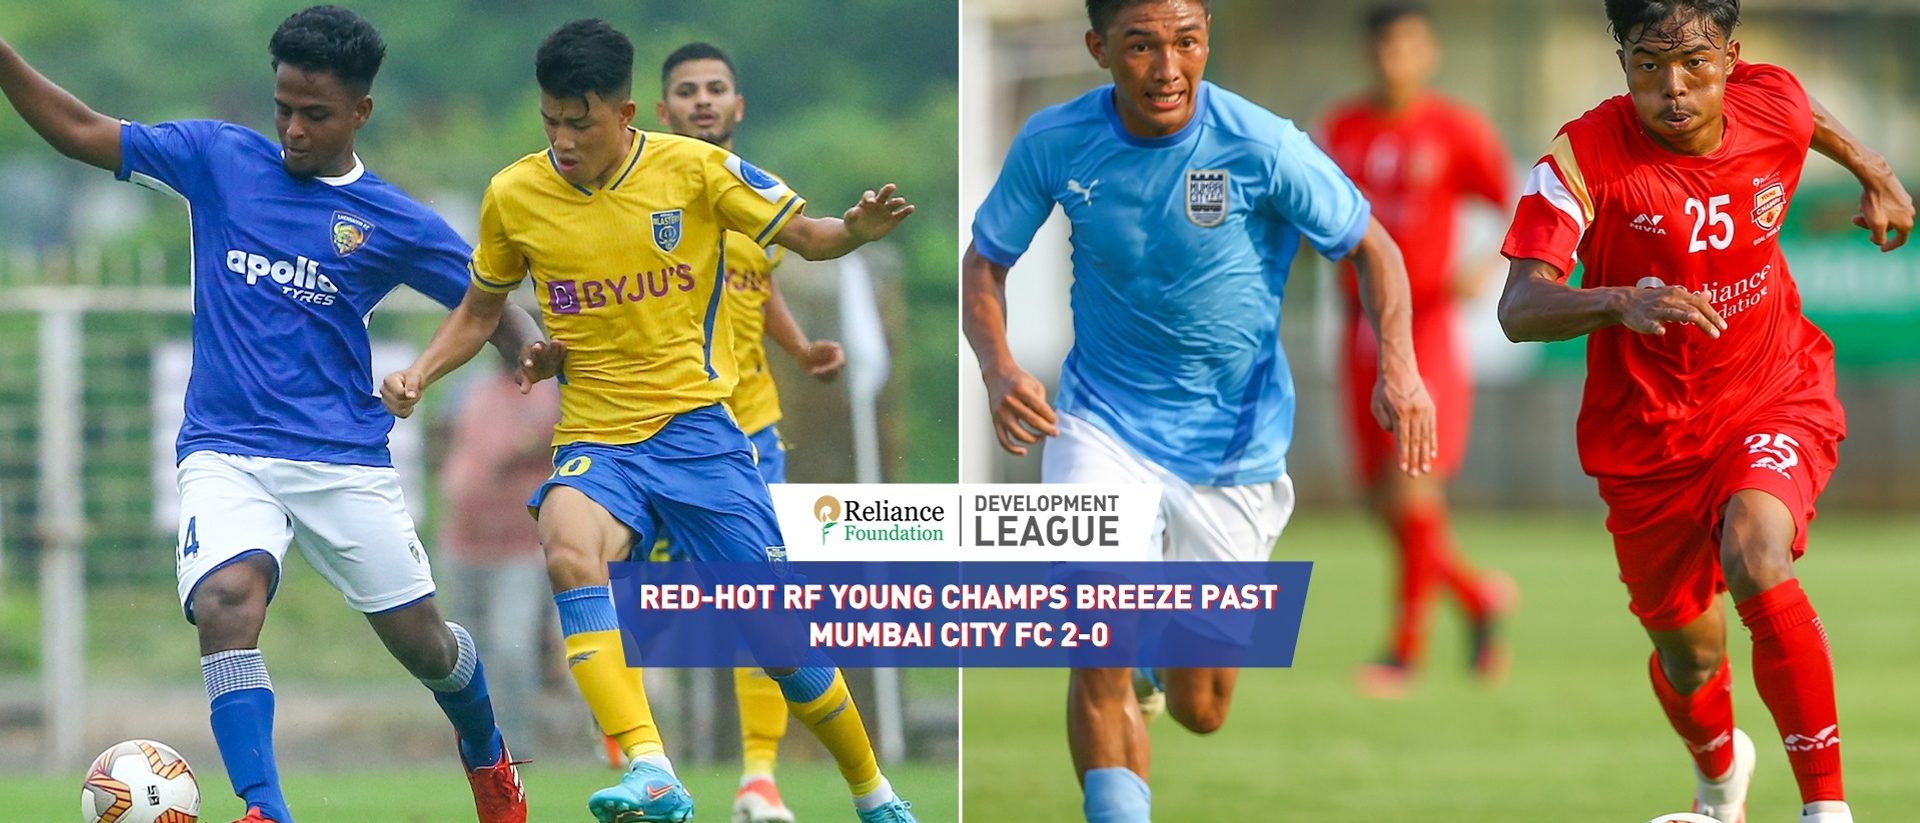 Red-hot RF Young Champs breeze past Mumbai City FC 2-0